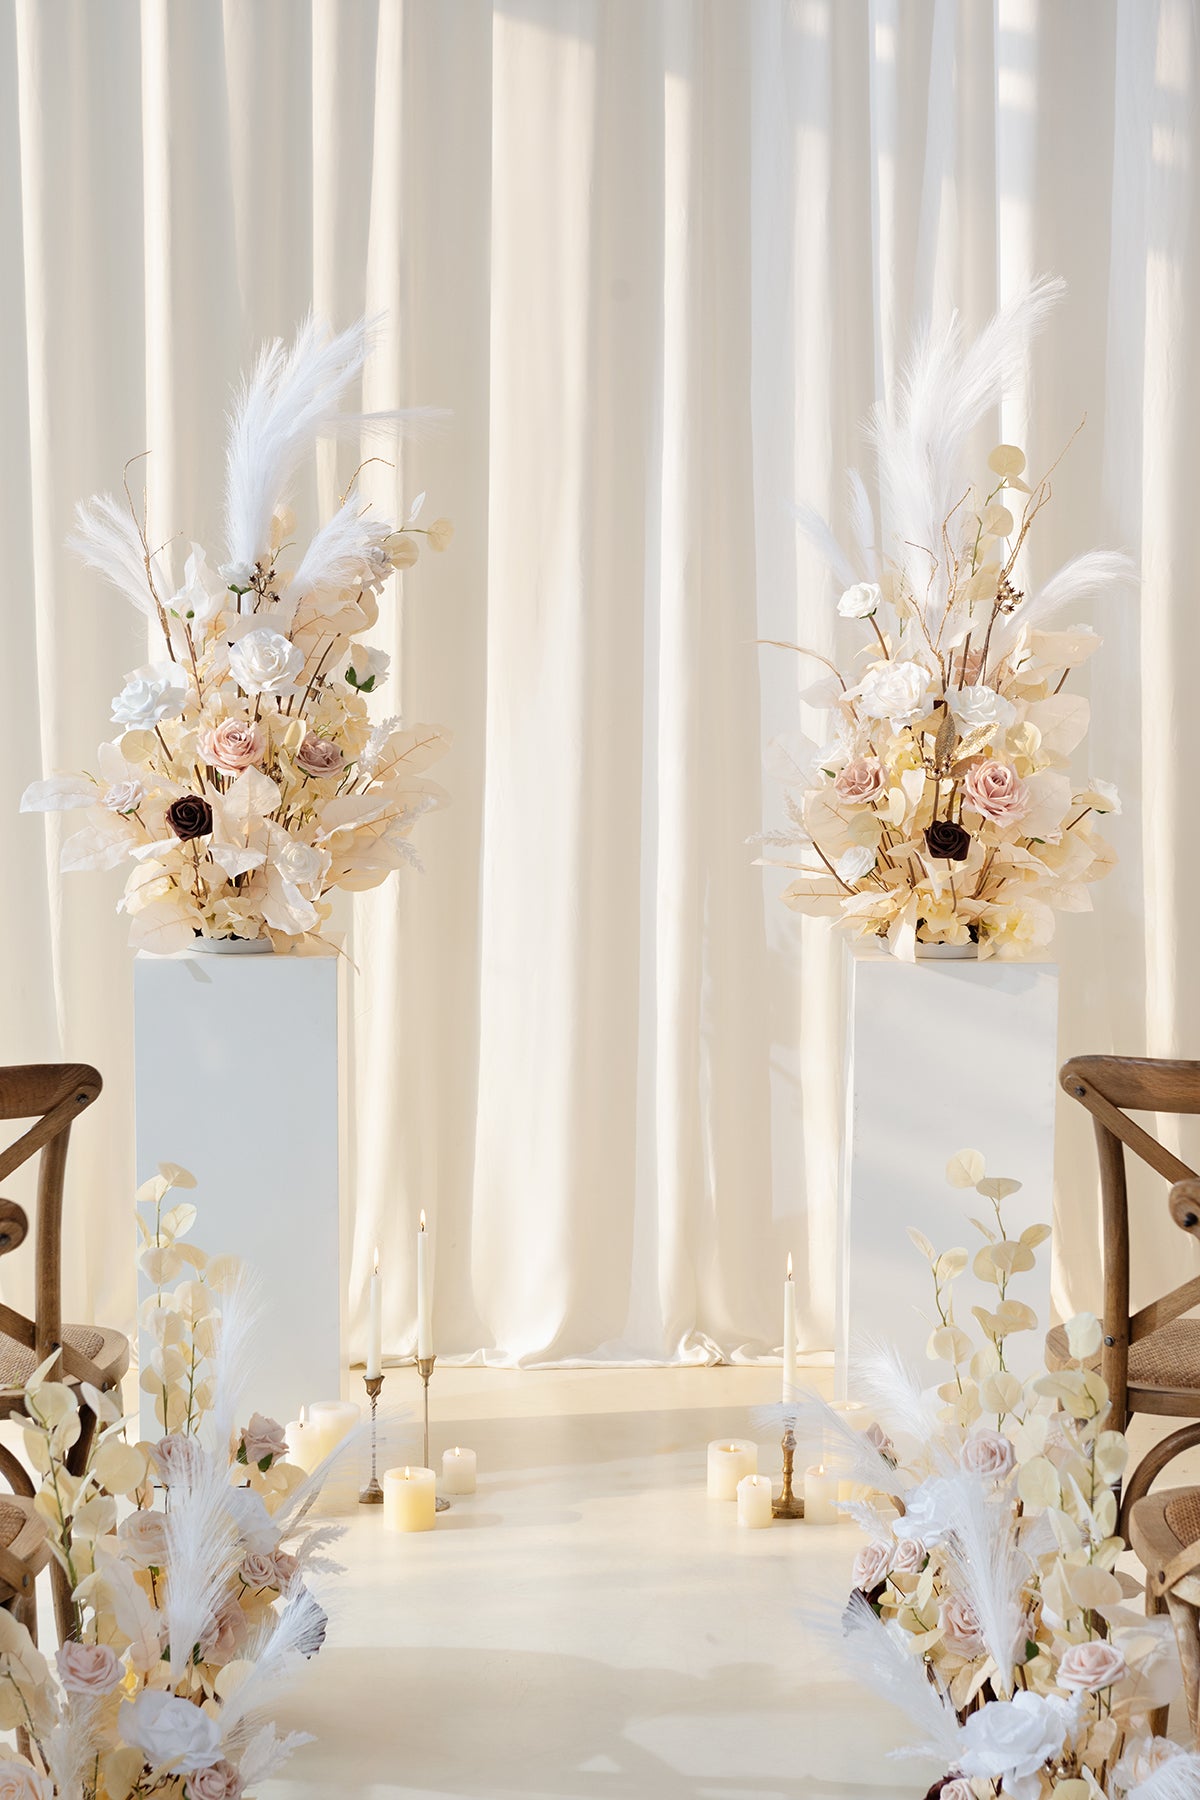 Altar Decor Free-Standing Flowers in White & Beige